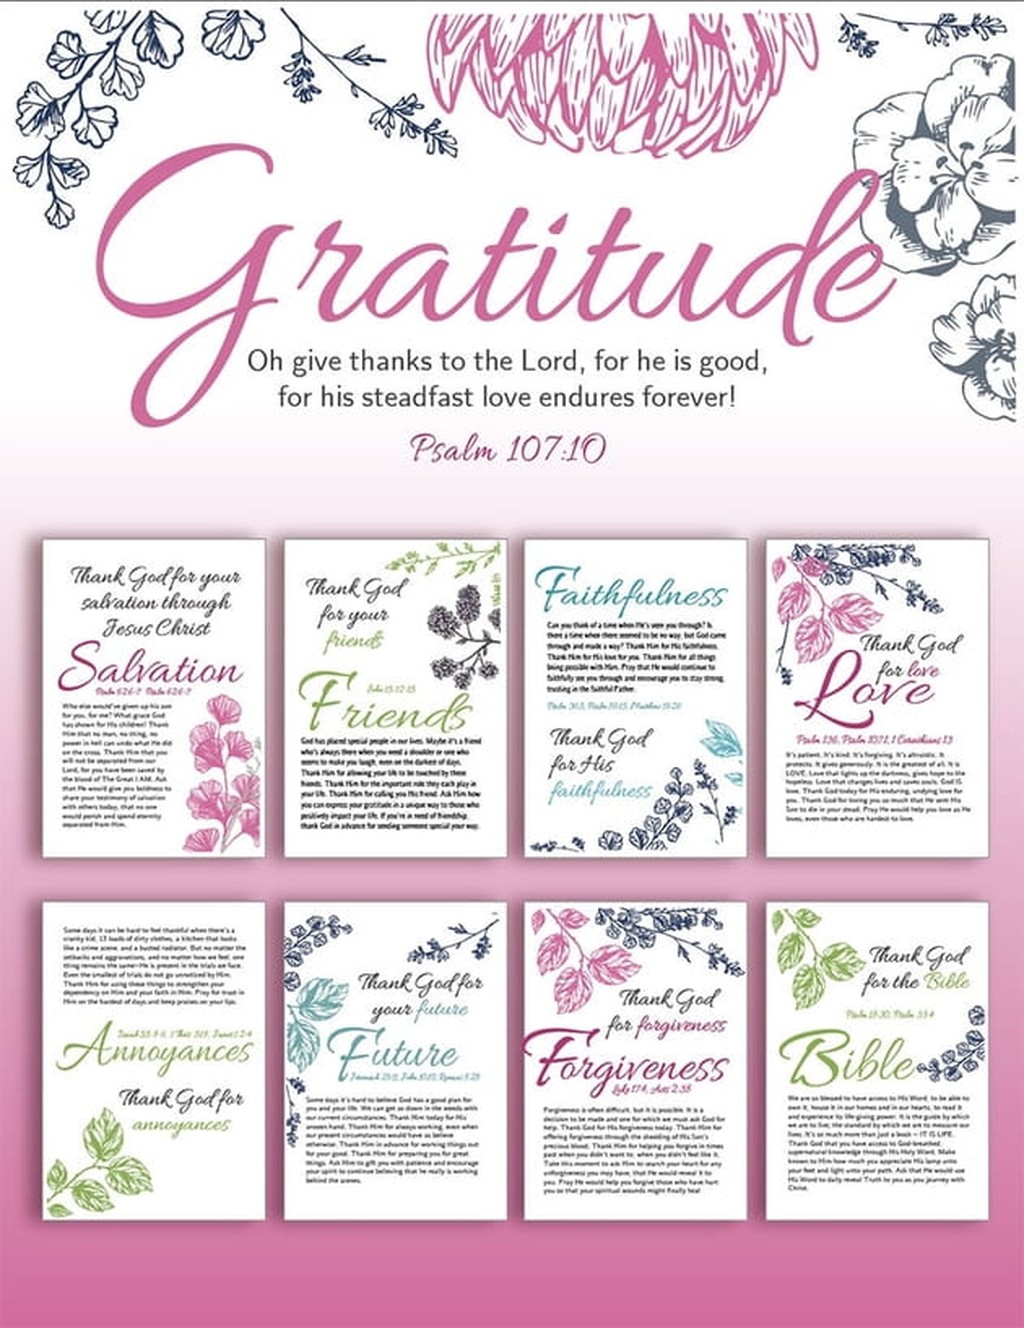 Gratitude Reminders for You to Print and Enjoy